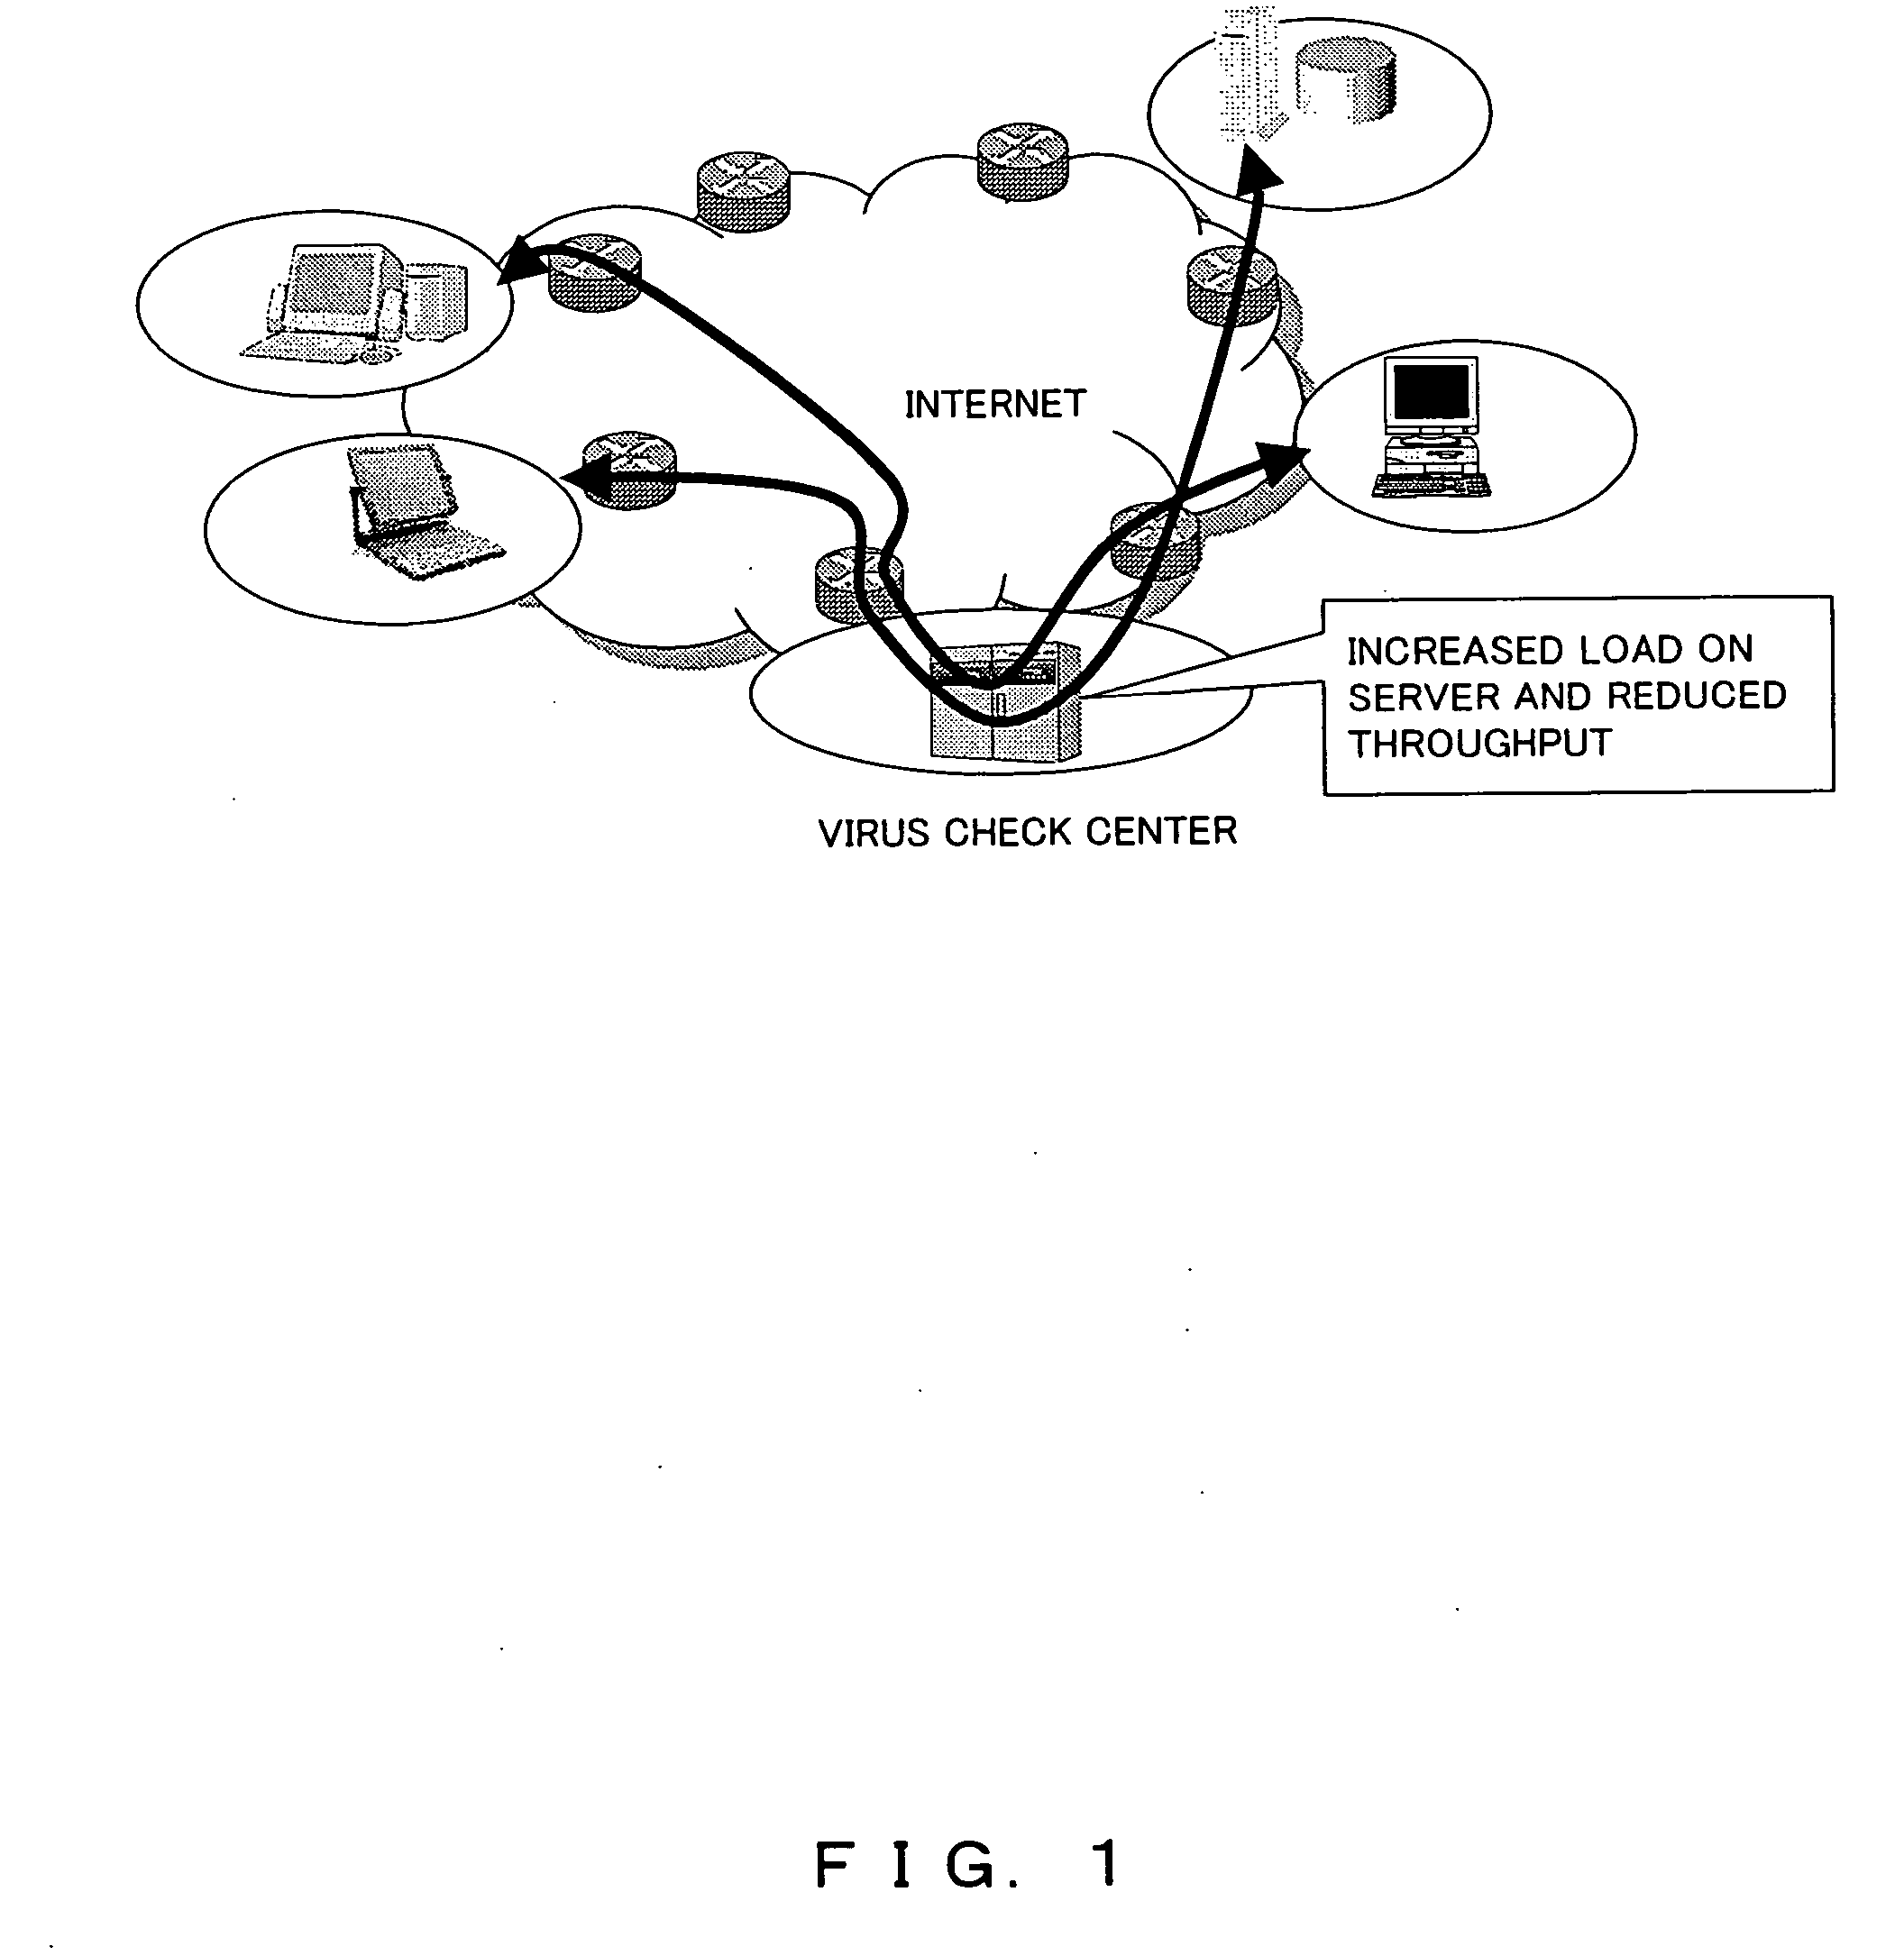 Secure communication system and communication route selecting device